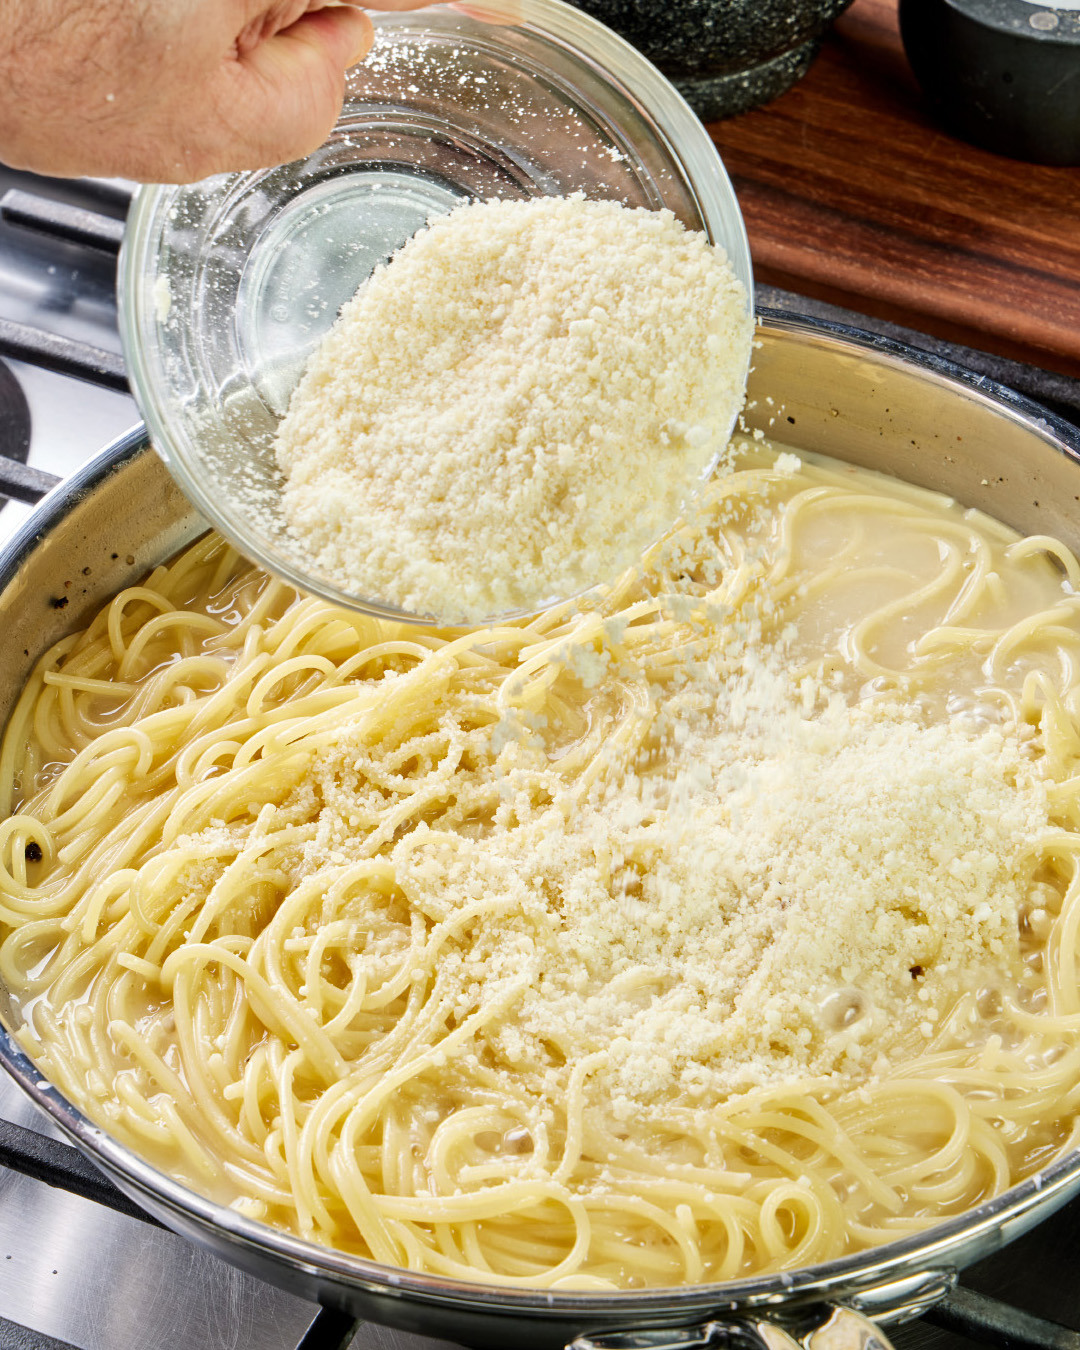 5. With the pan still on medium-high, add about half of the remaining cheese mixture. Toss this first addition of cheese with the noodles until fully melted.